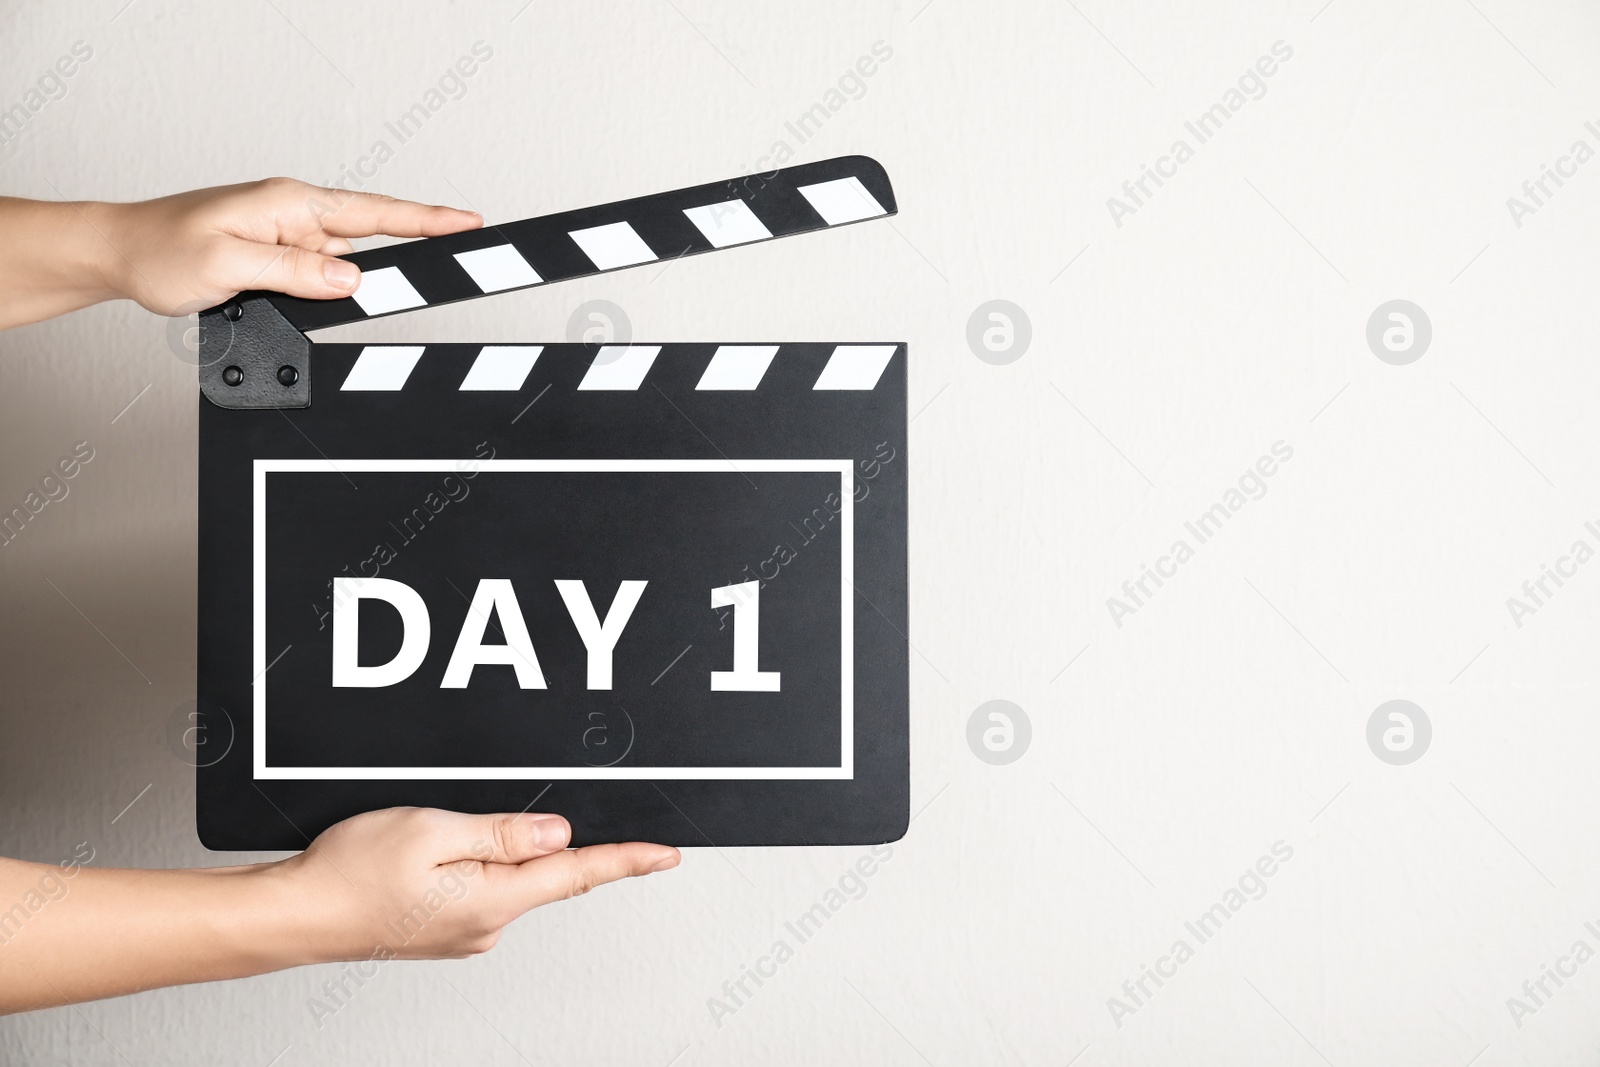 Image of Starting new life chapter. Woman holding clapperboard with text Day 1, closeup